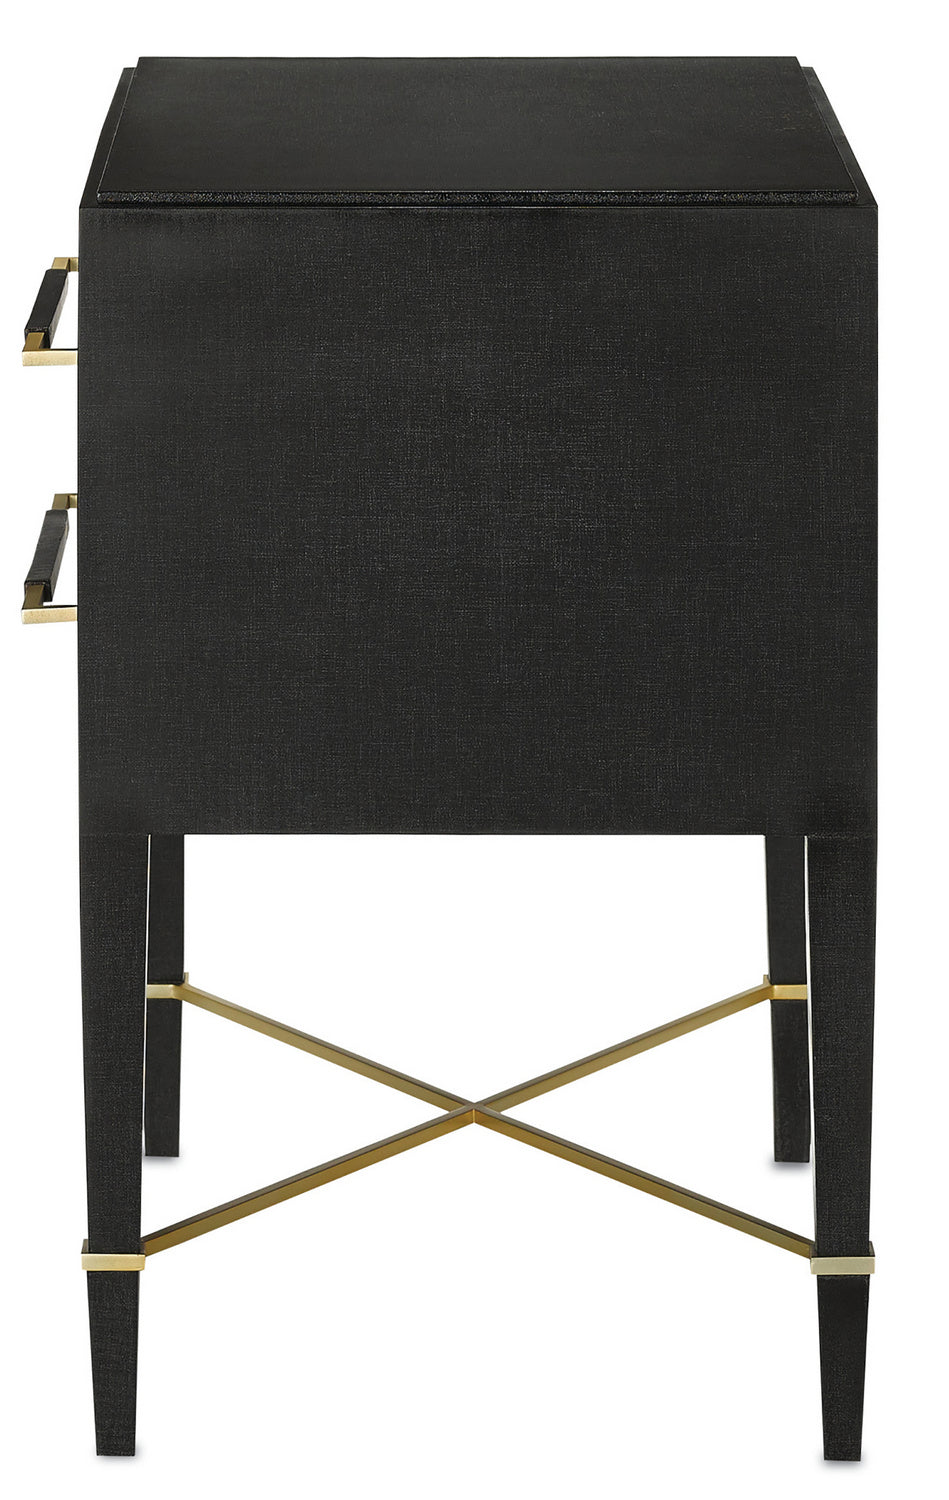 Nightstand from the Verona collection in Black Lacquered Linen/Champagne finish